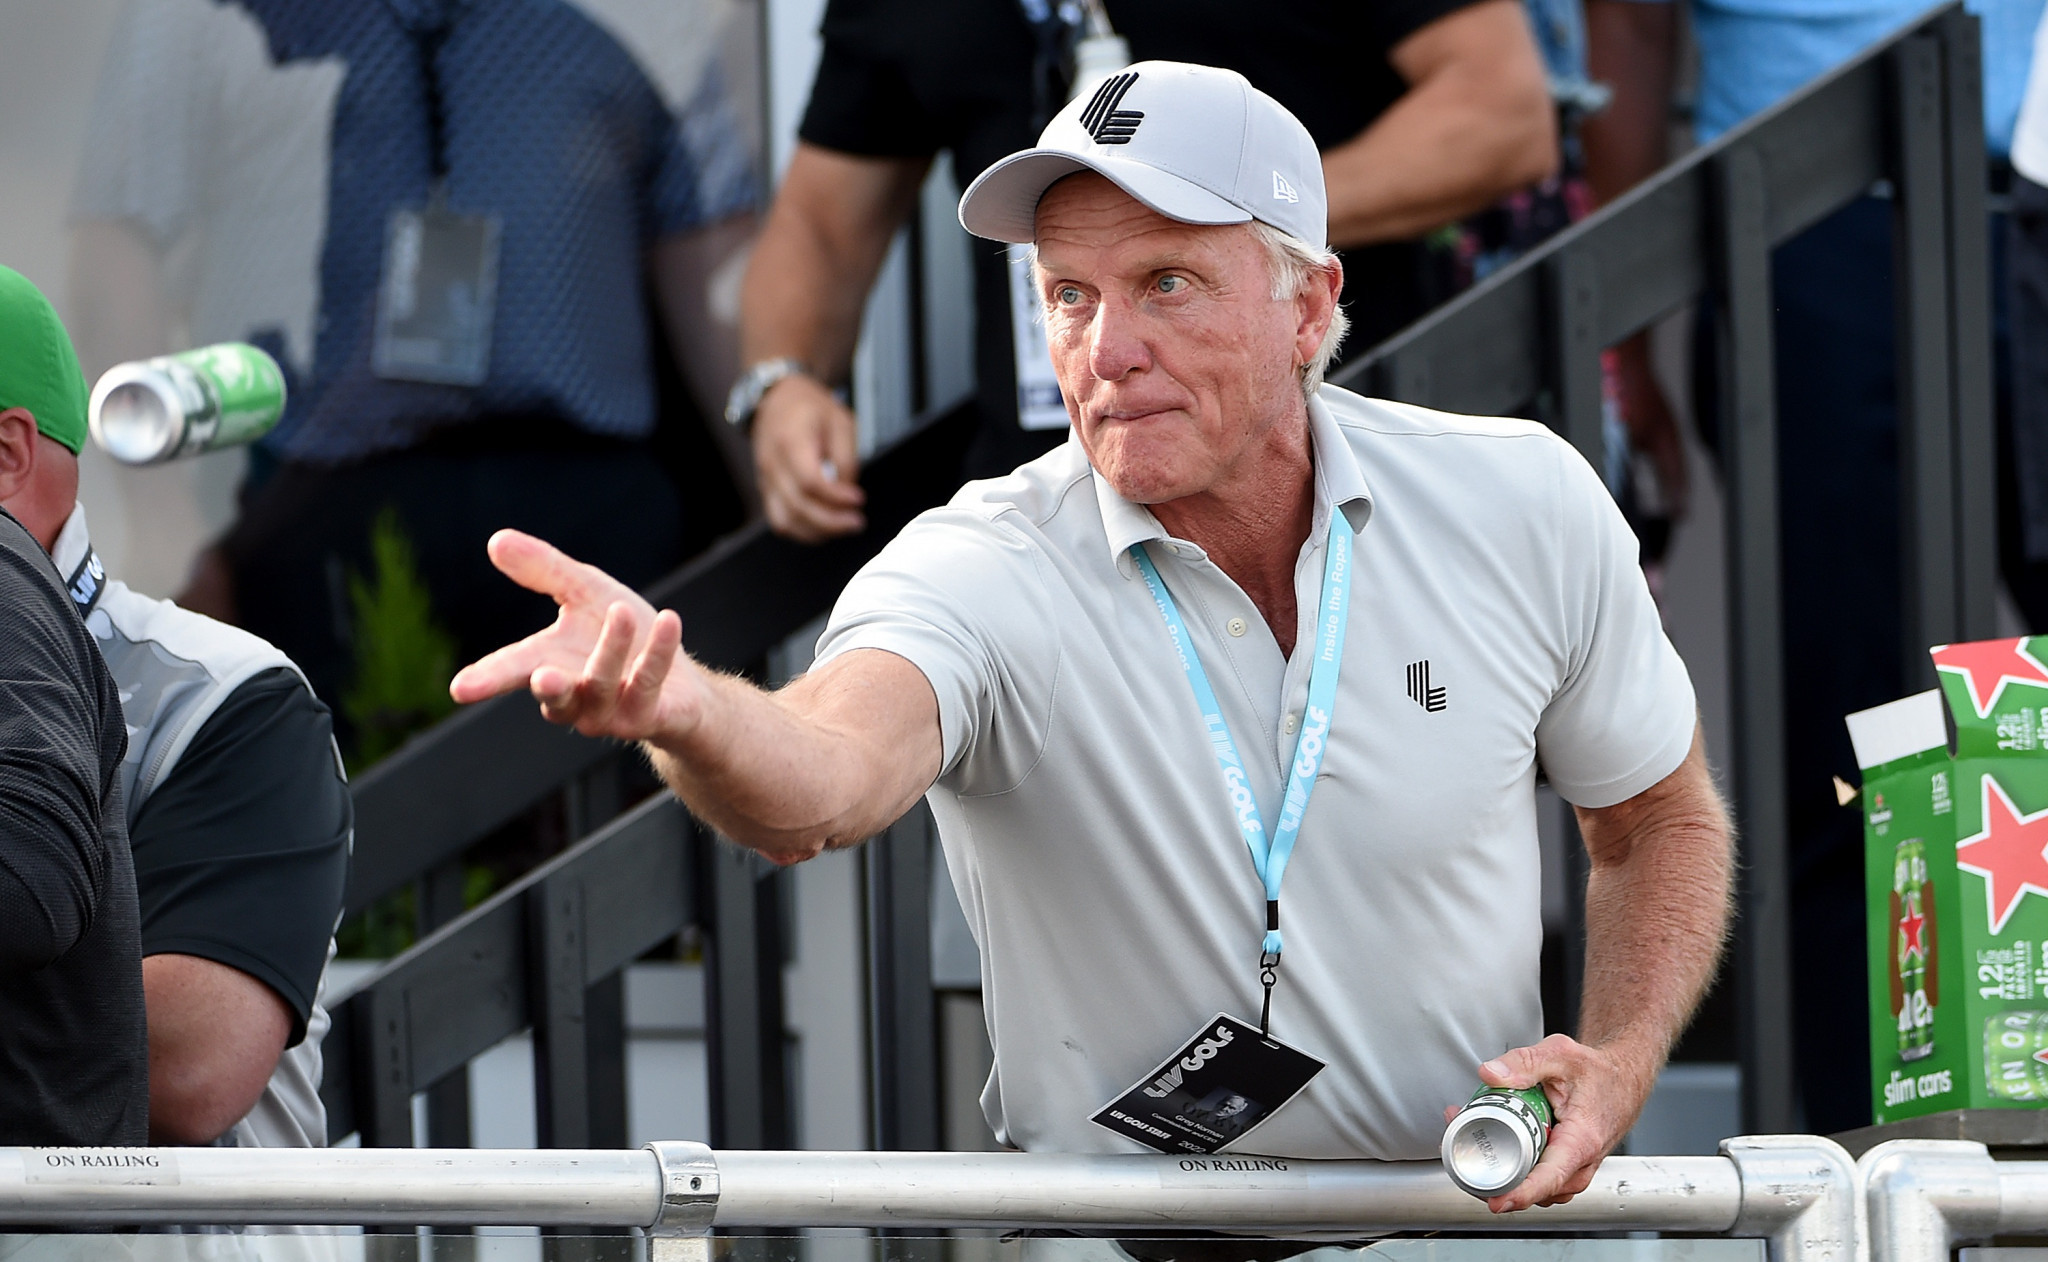 Greg Norman will be unable to take part in events celebrating the 150th anniversary of The Open Championship at St Andrews ©Getty Images